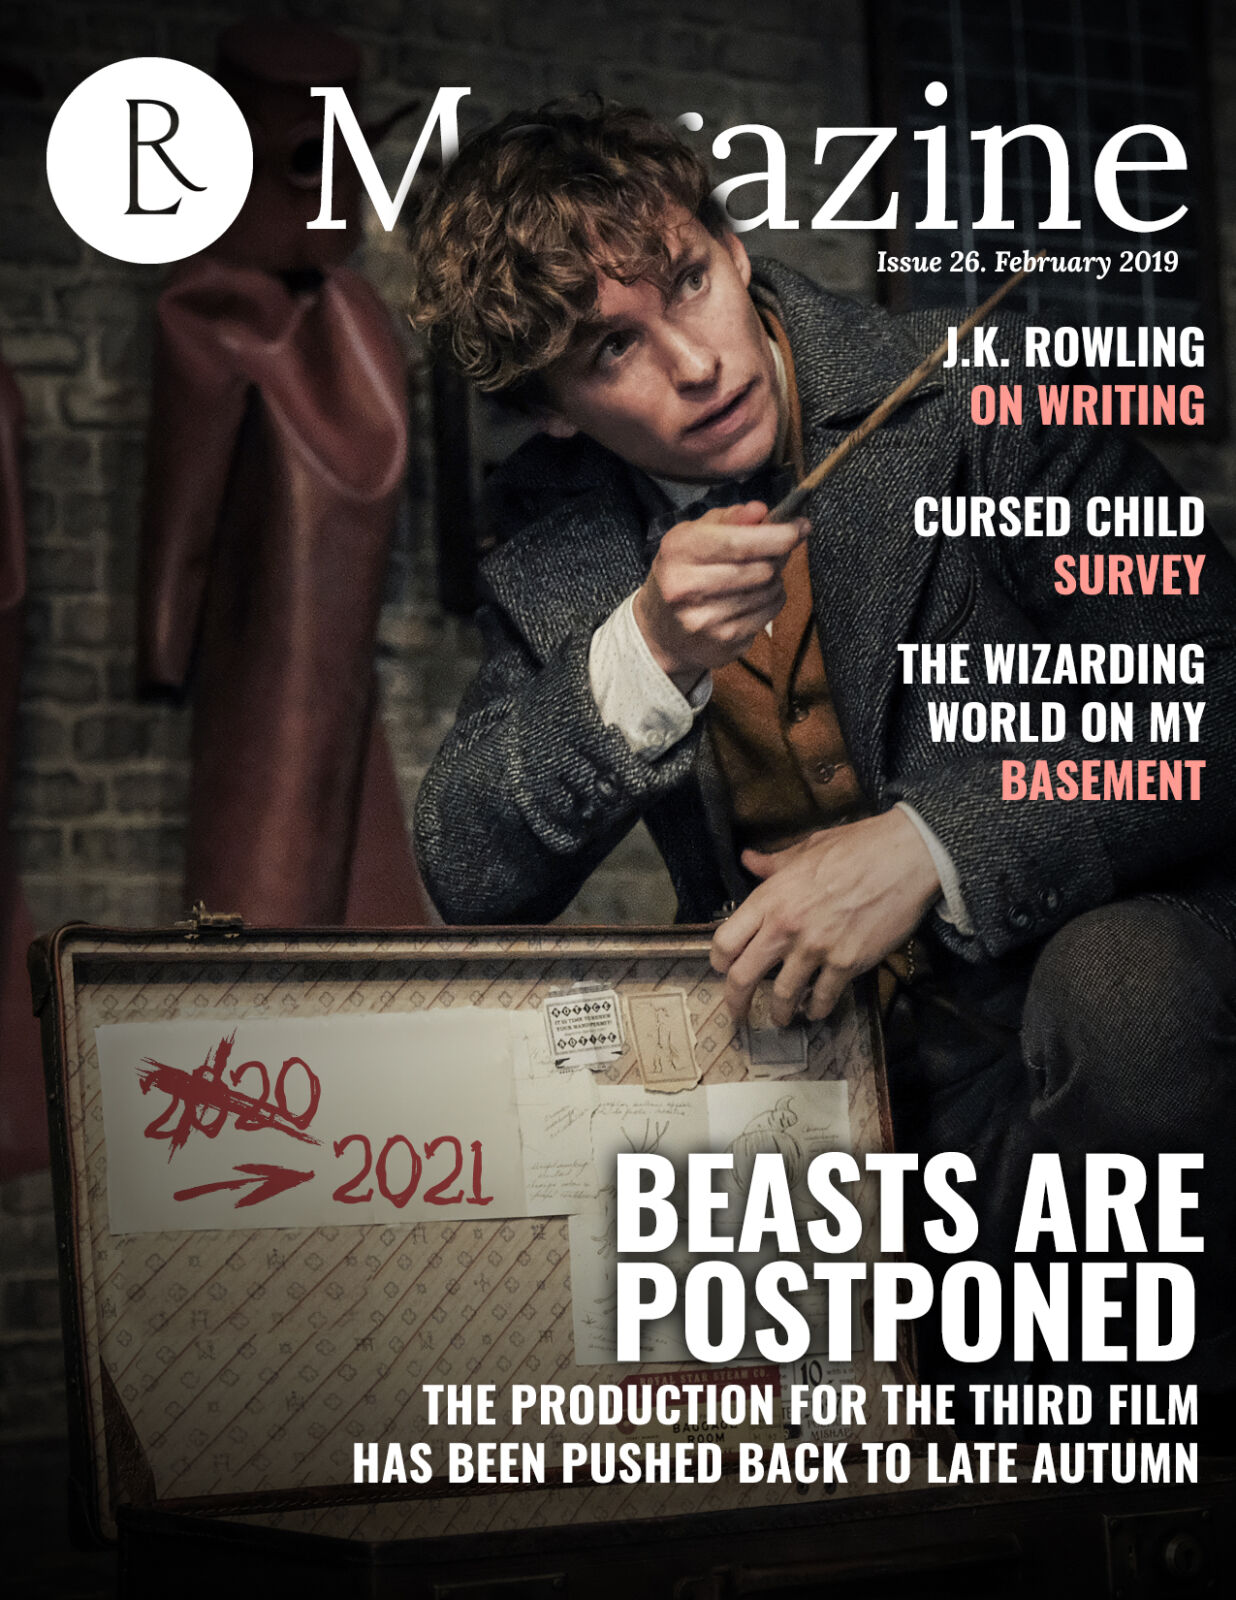 The Rowling Library Magazine #26 (February 2019): Beasts are postponed